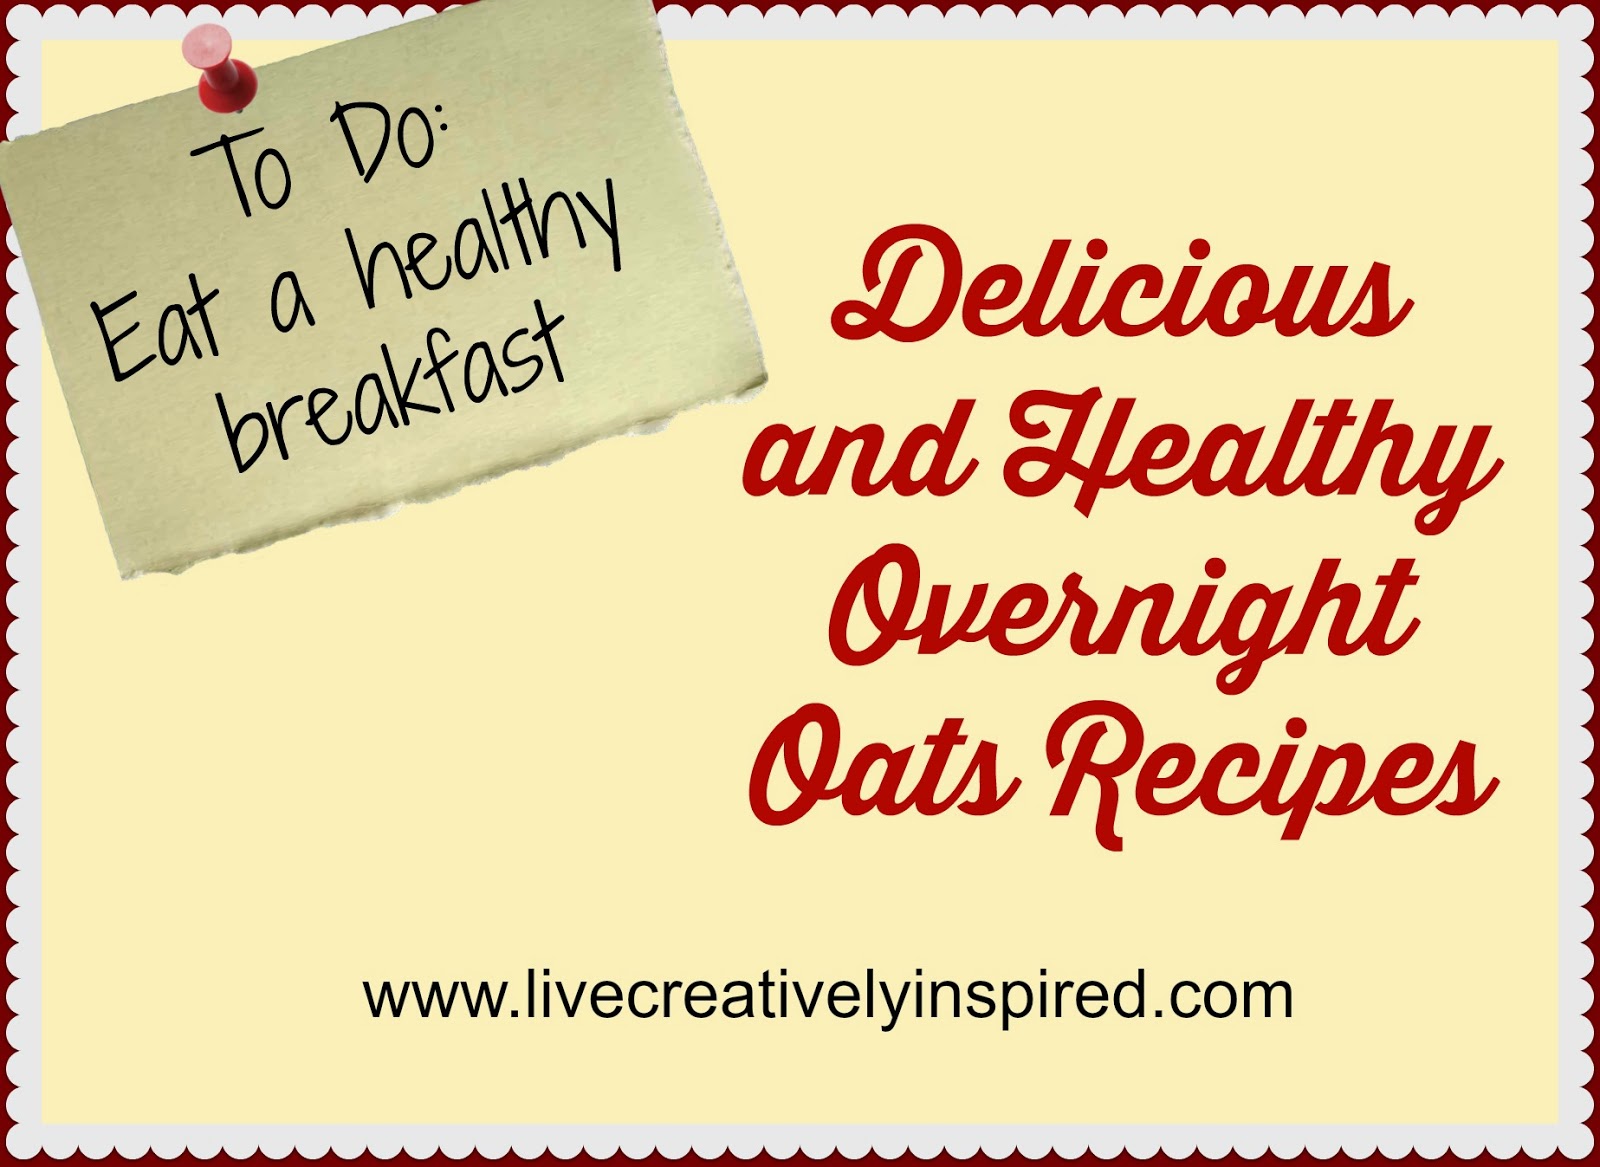 Overnight Oats recipes | Days of Chalk and Chocolate